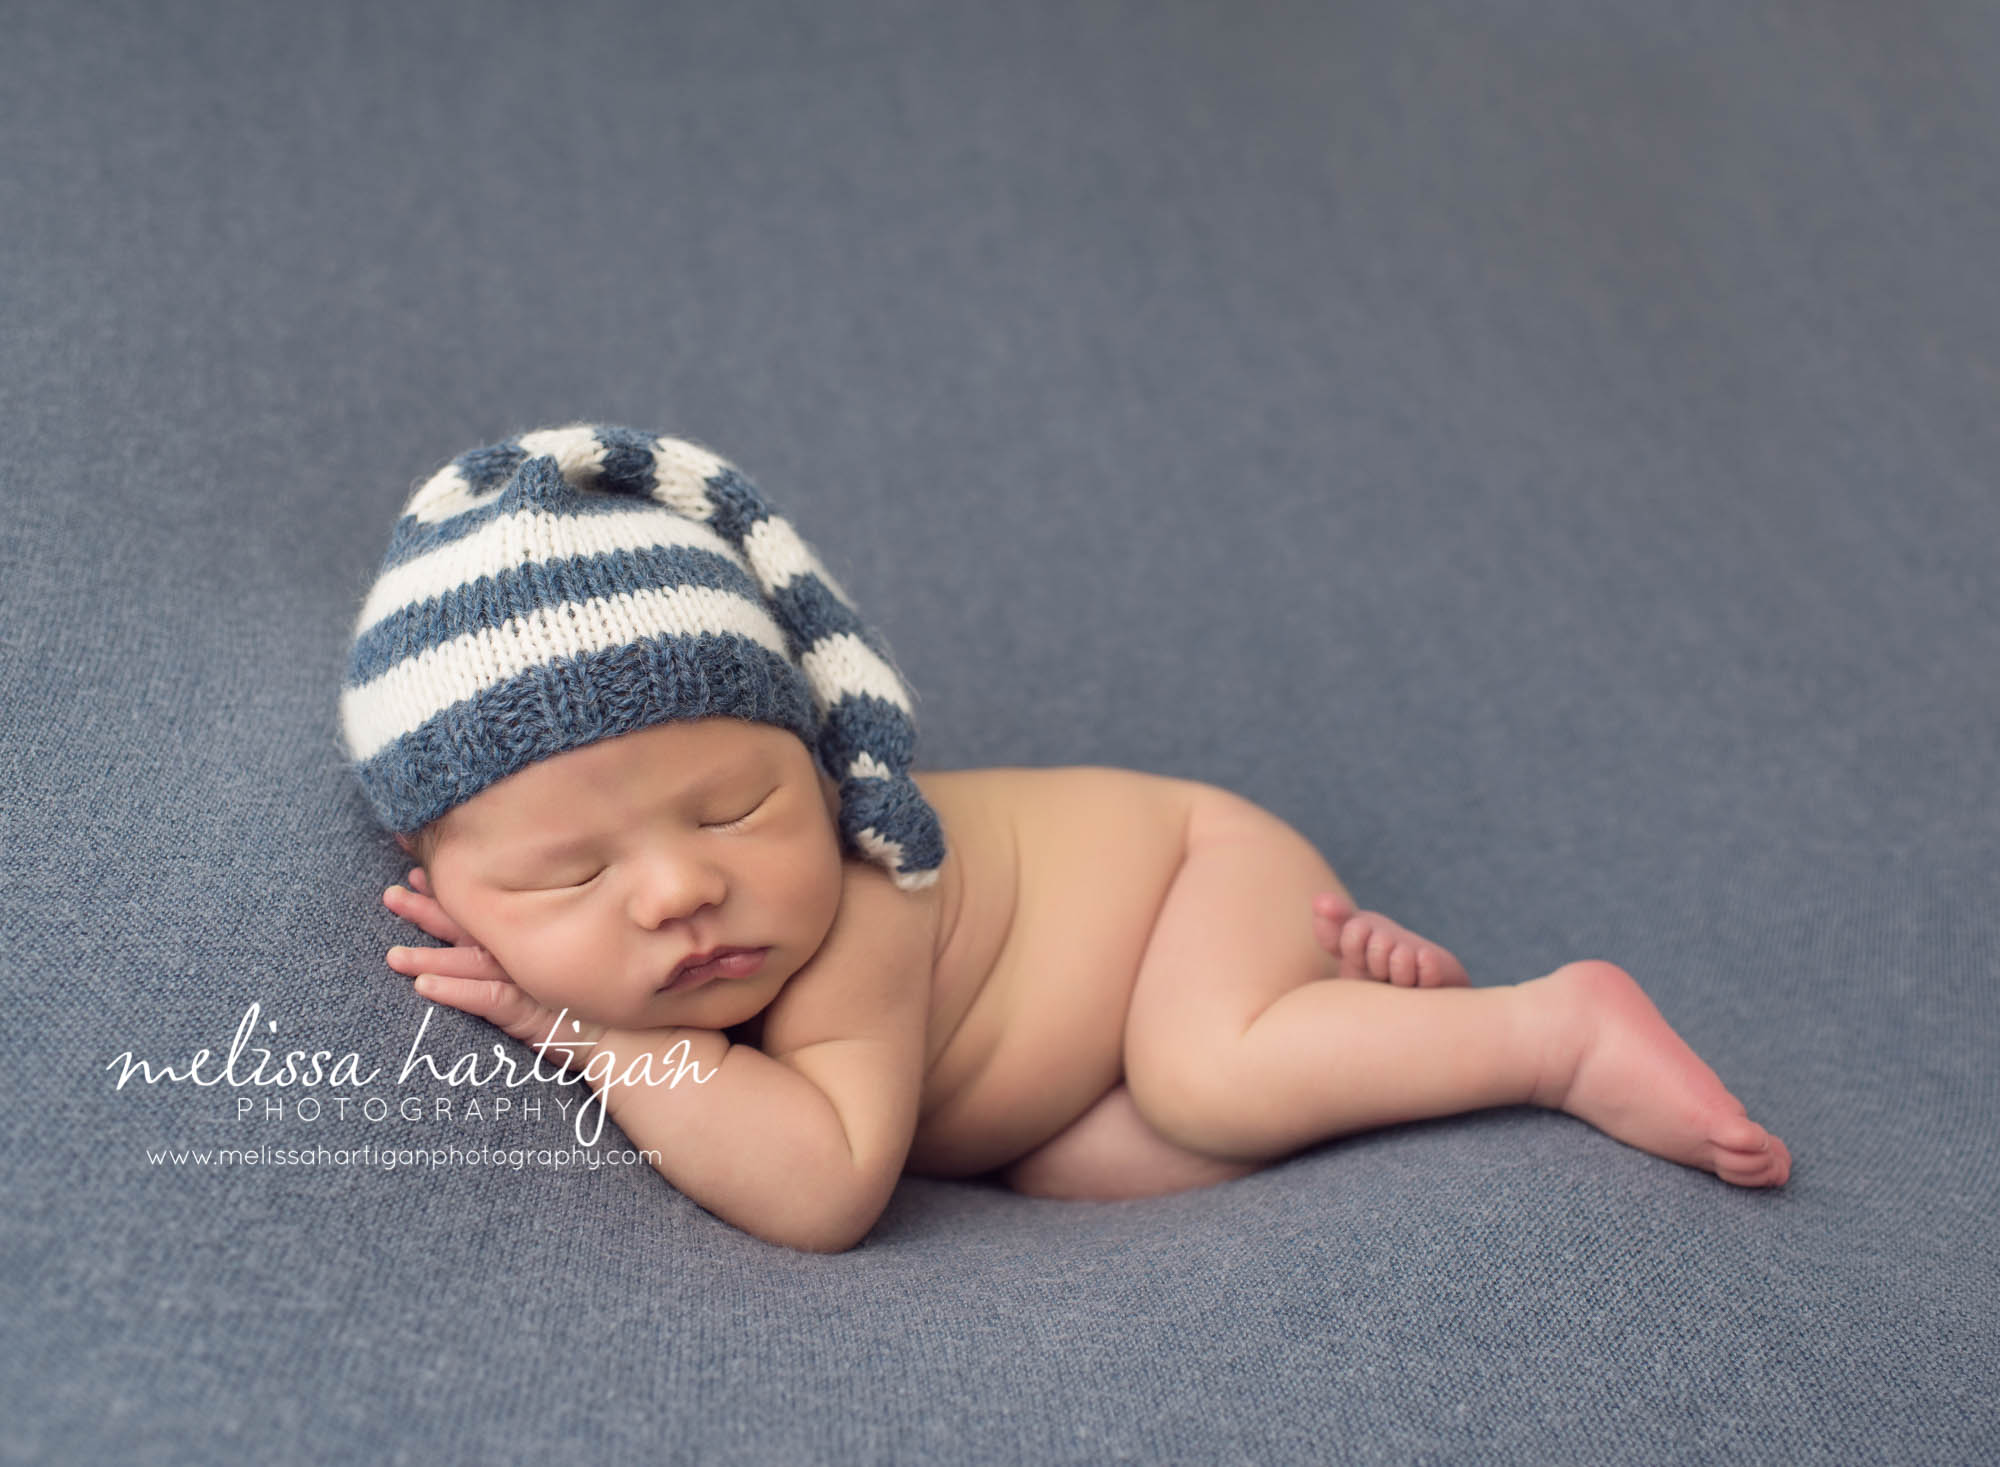 Melissa Hartigan Photography Maternity and Newborn Connecticut Photographer Lucas Newborn Session Baby boy sleeping on blue blanket with blue and cream striped knit hat